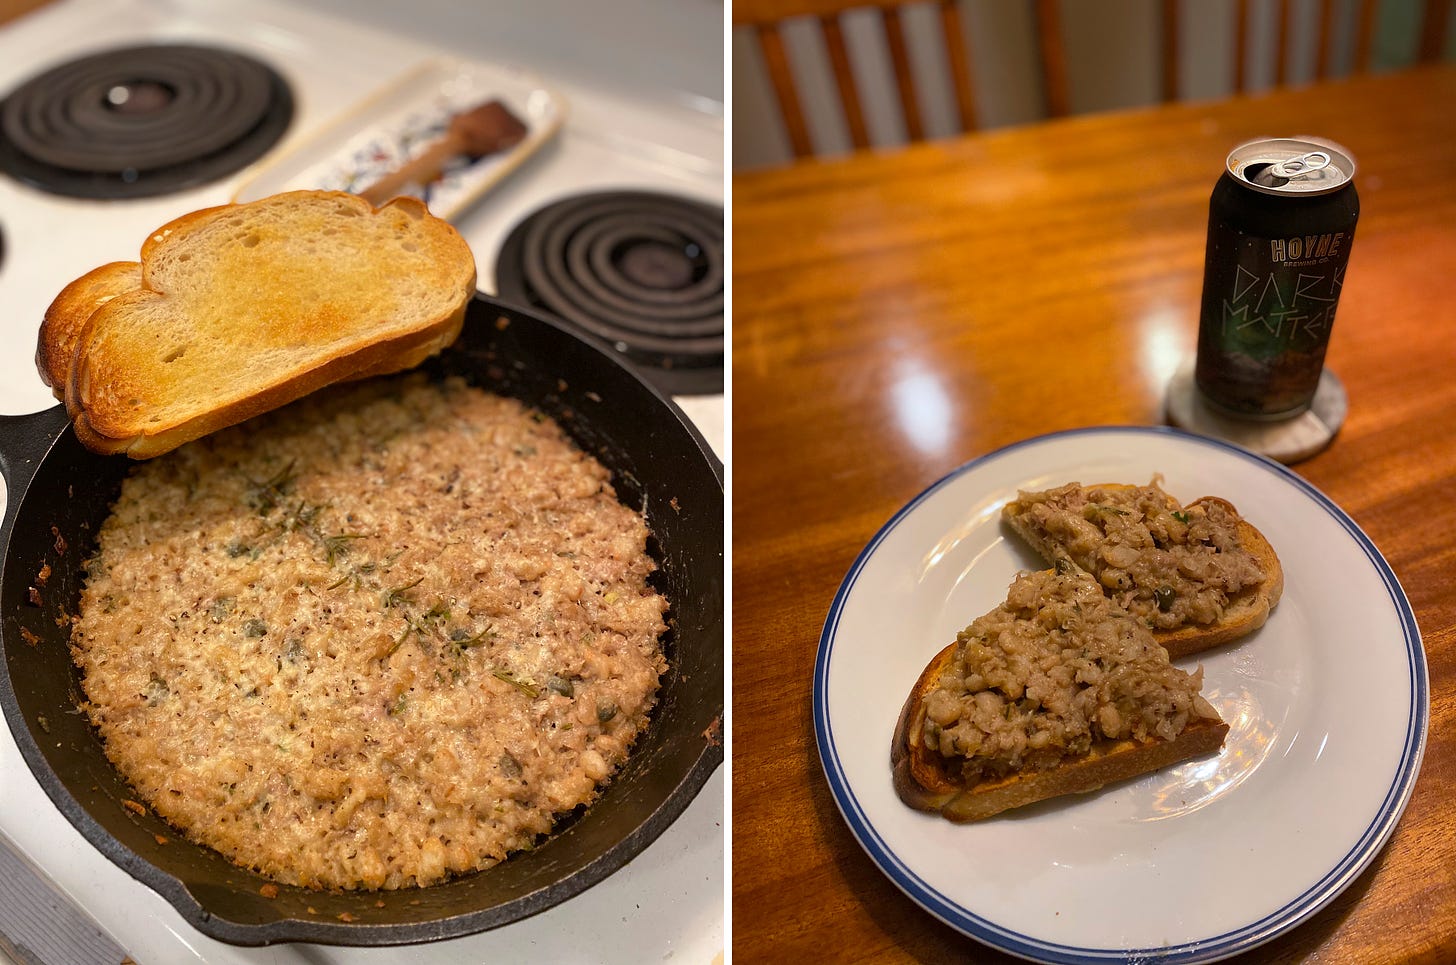 Left image: a cast iron pan of baked white beans & tuna with cheese on top. A sprig of rosemary is nestled in the centre. Two slices of toast rest at the edge of the pan. Right image: a plate with a slice of toast, halved, with the beans on top. Behind it on a coaster is a black and green can of beer, labelled "Dark Matter".